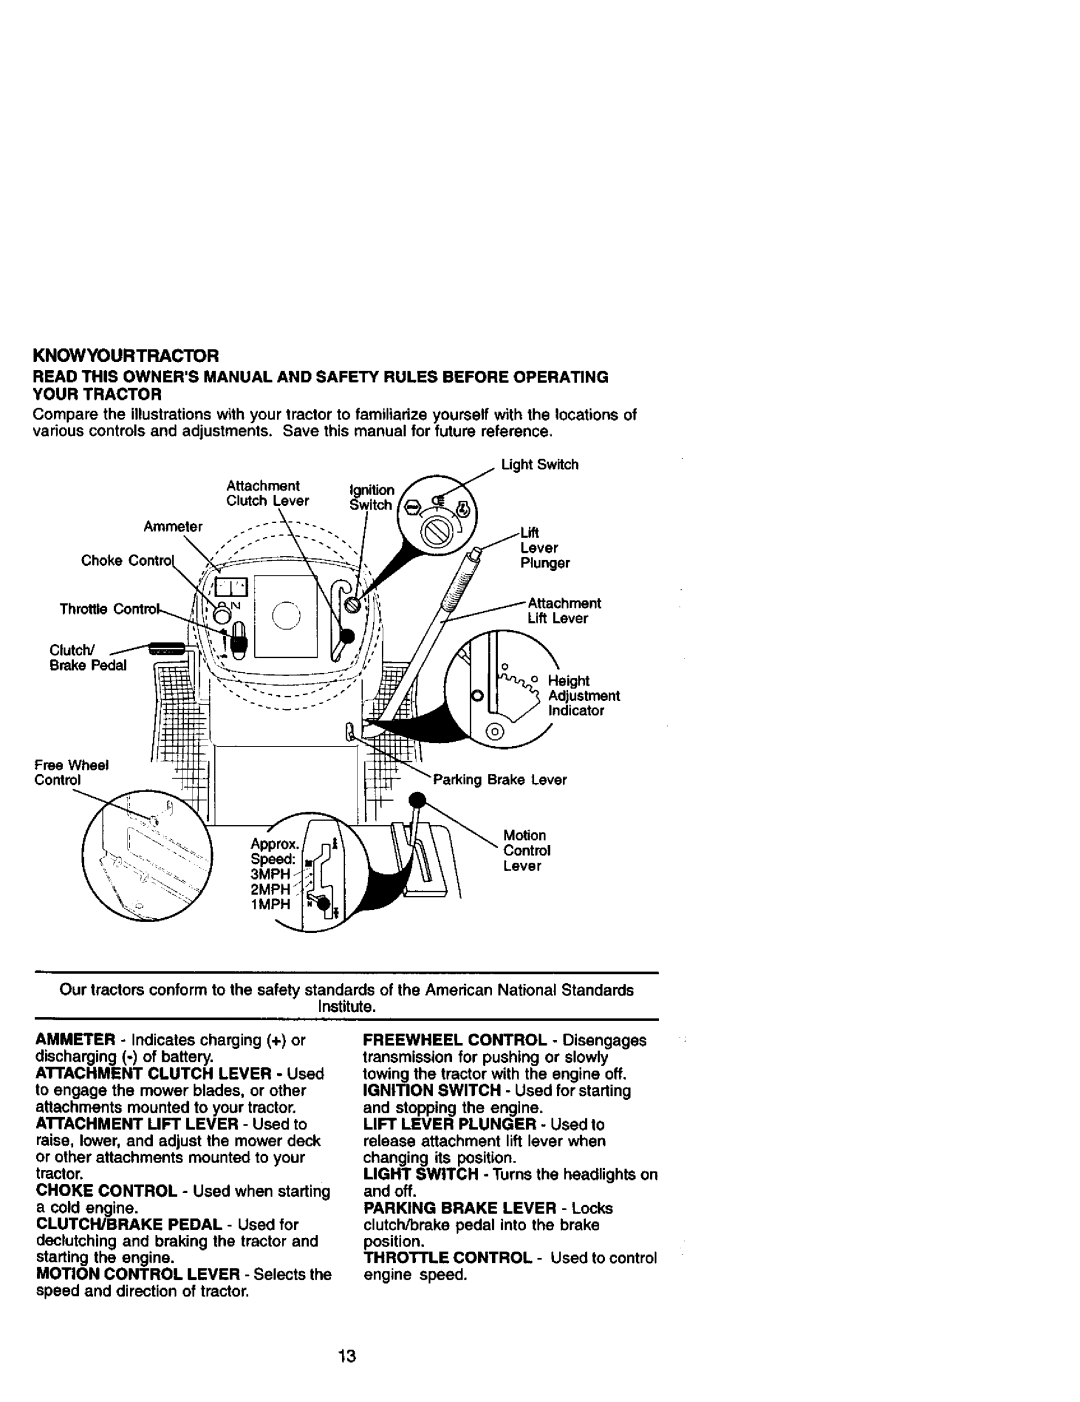 Craftsman 917.27182 manual Knowyourtractor, Lever, engine speed 